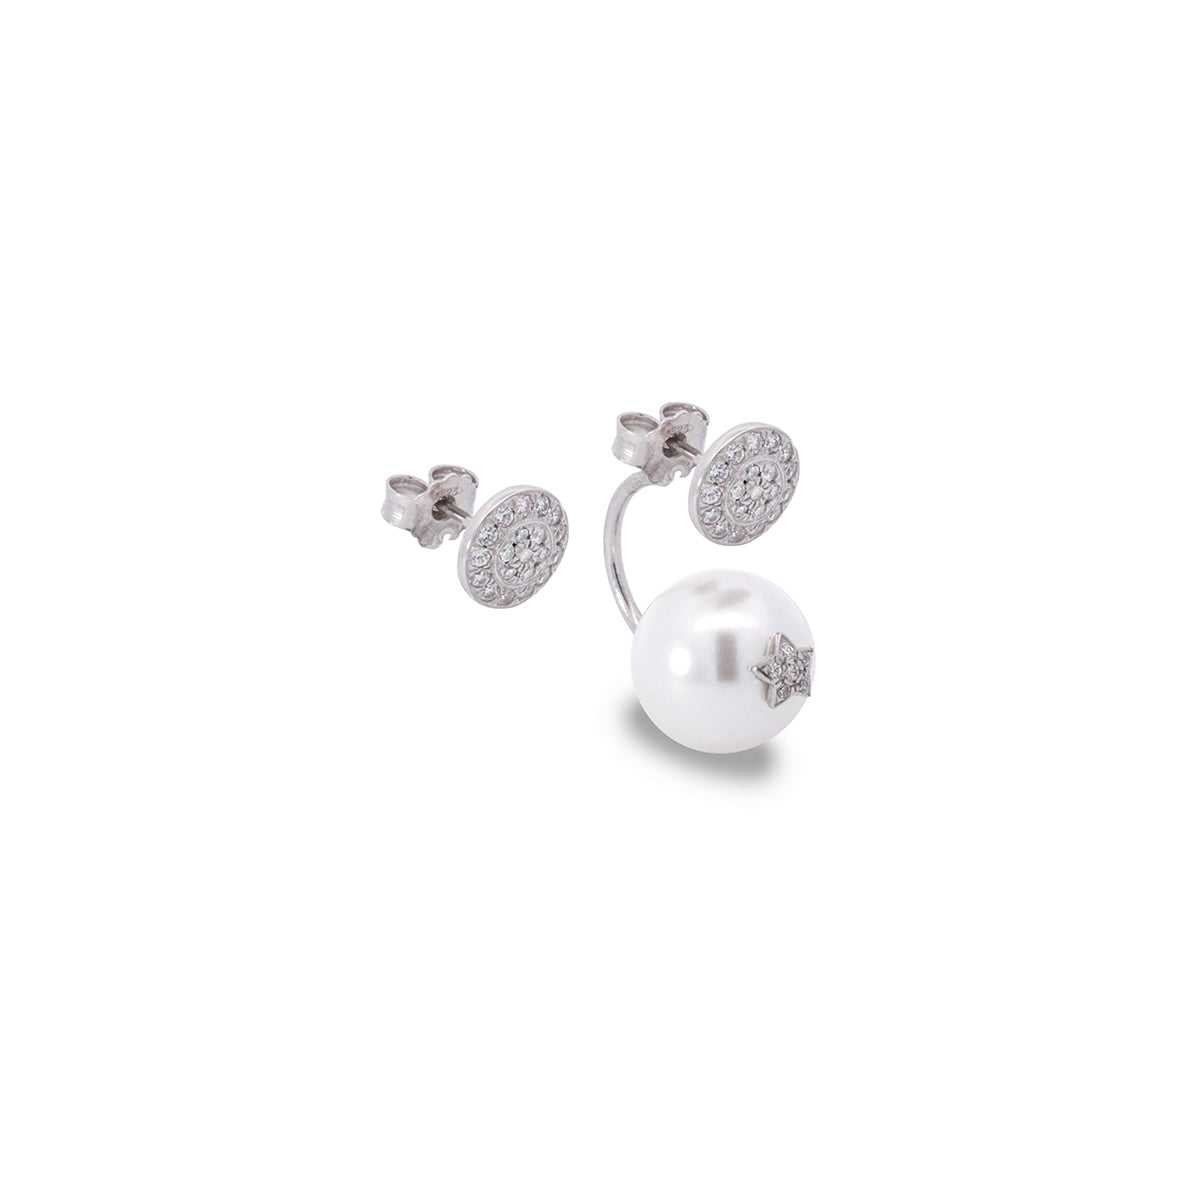 Earrings - PEARL AND BUTTON ASYMMETRIC EARRINGS - GALACTICA ICE - 1 | Rue des Mille